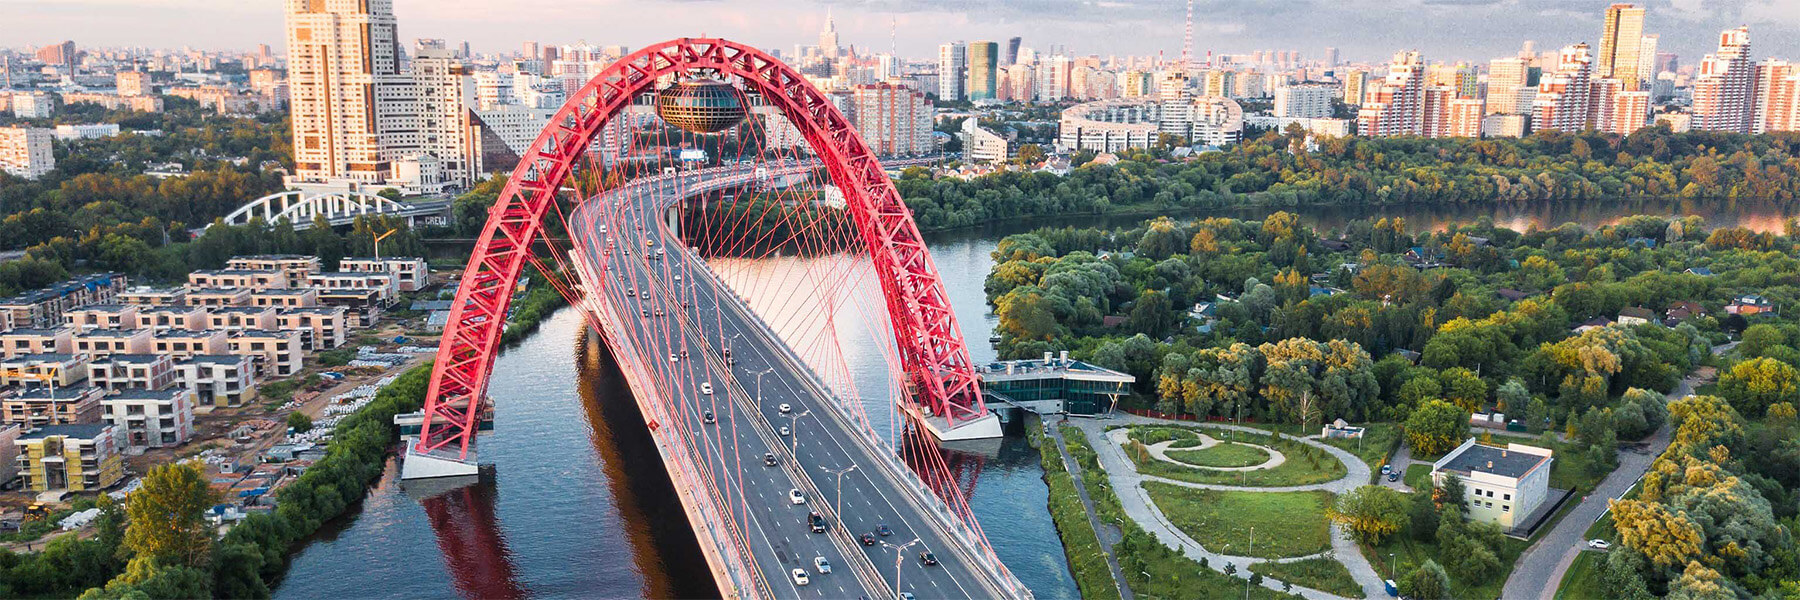 Zhivopisny Bridge is a cable-stayed bridge that spans Moskva River in north-western Moscow, Russia.